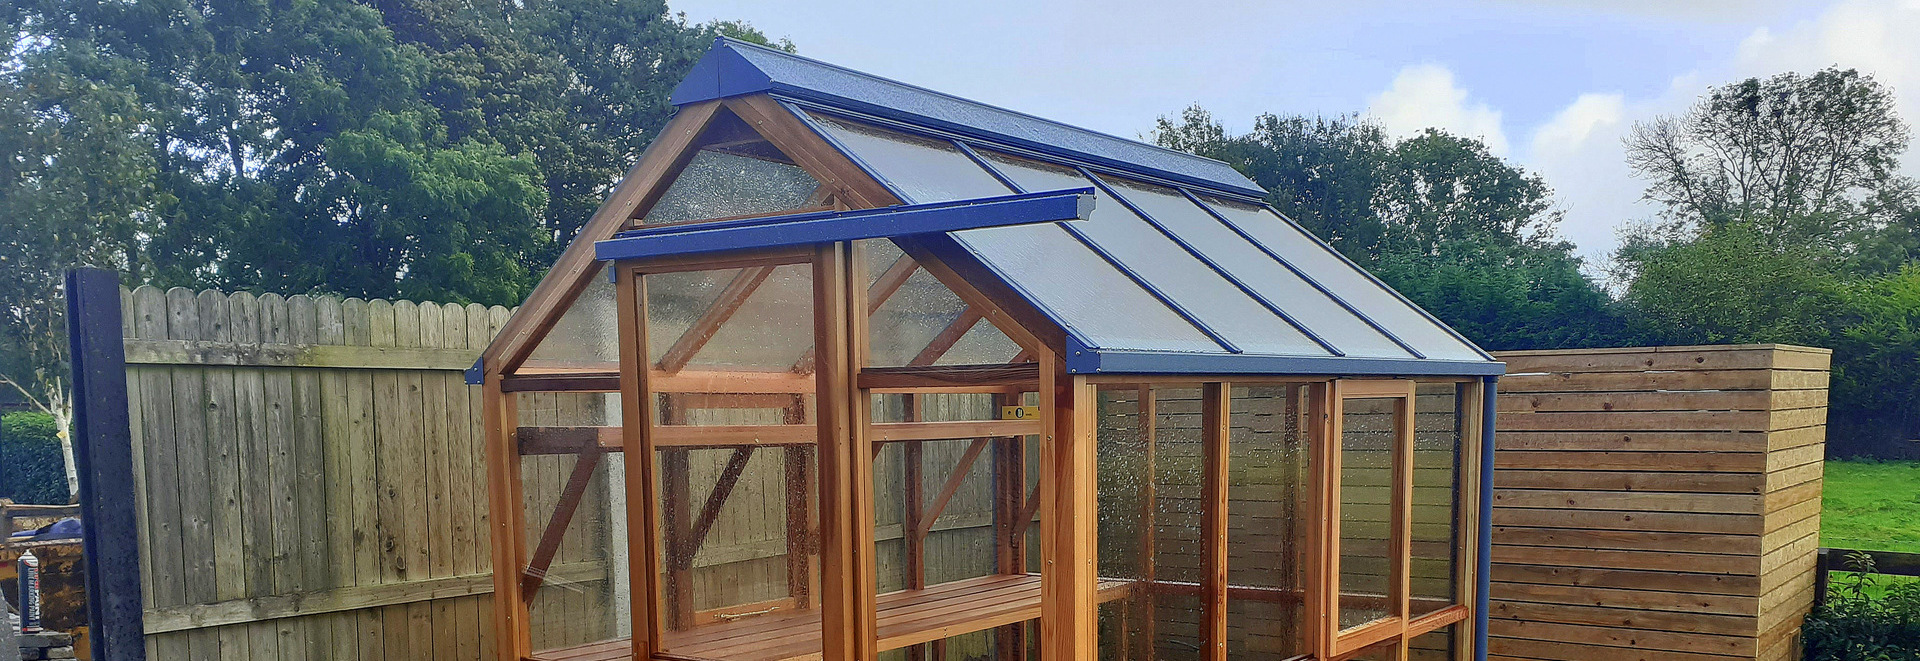 Classic Six (6 x 8) Greenhouse installation in Maynooth, Co Kildare | Supplied + fitted by Owen Chubb Garden Landscapers